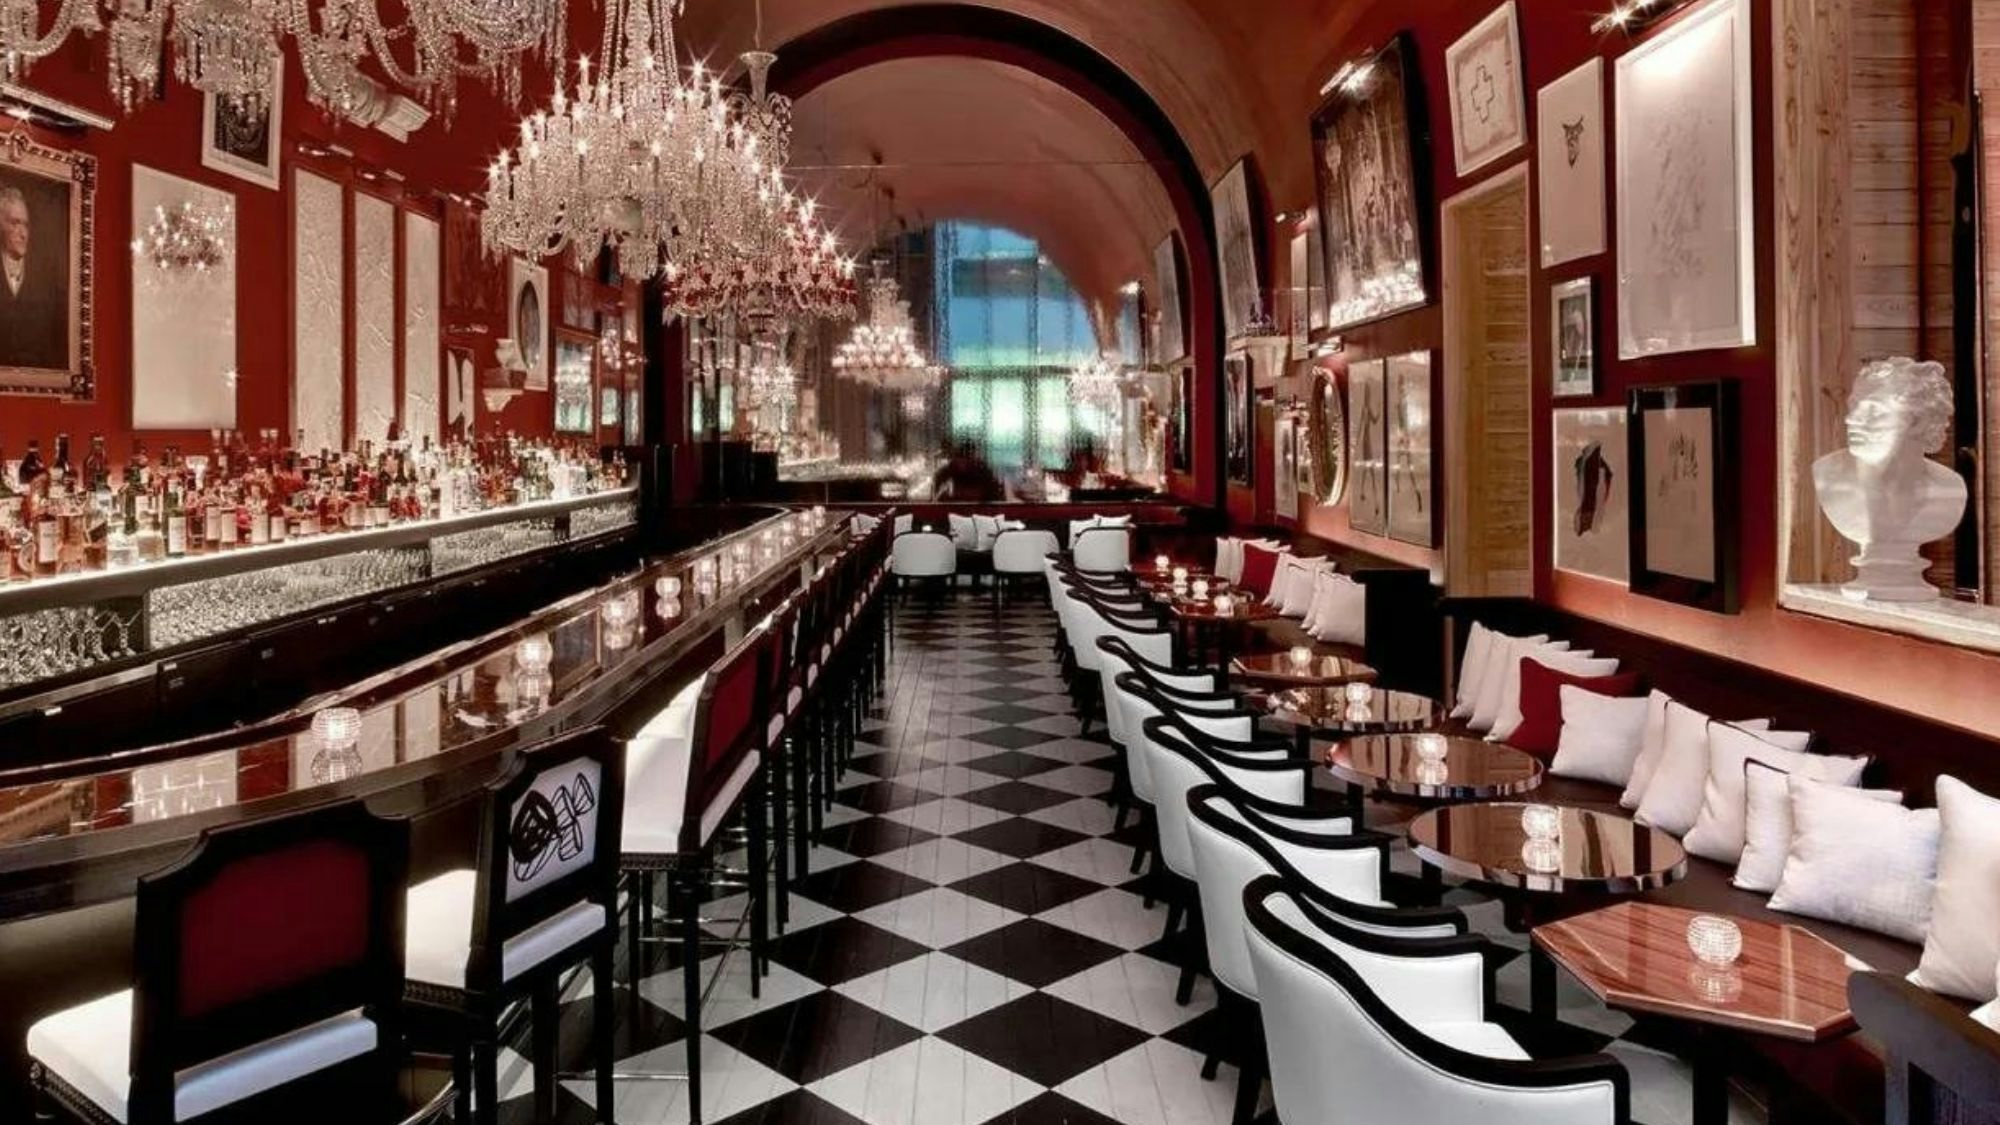 China remains the second largest consumer of luxury, with an apparent love for brand-led hotels such as the Baccarat in New York City. Photo: Baccarat Hotel Bar